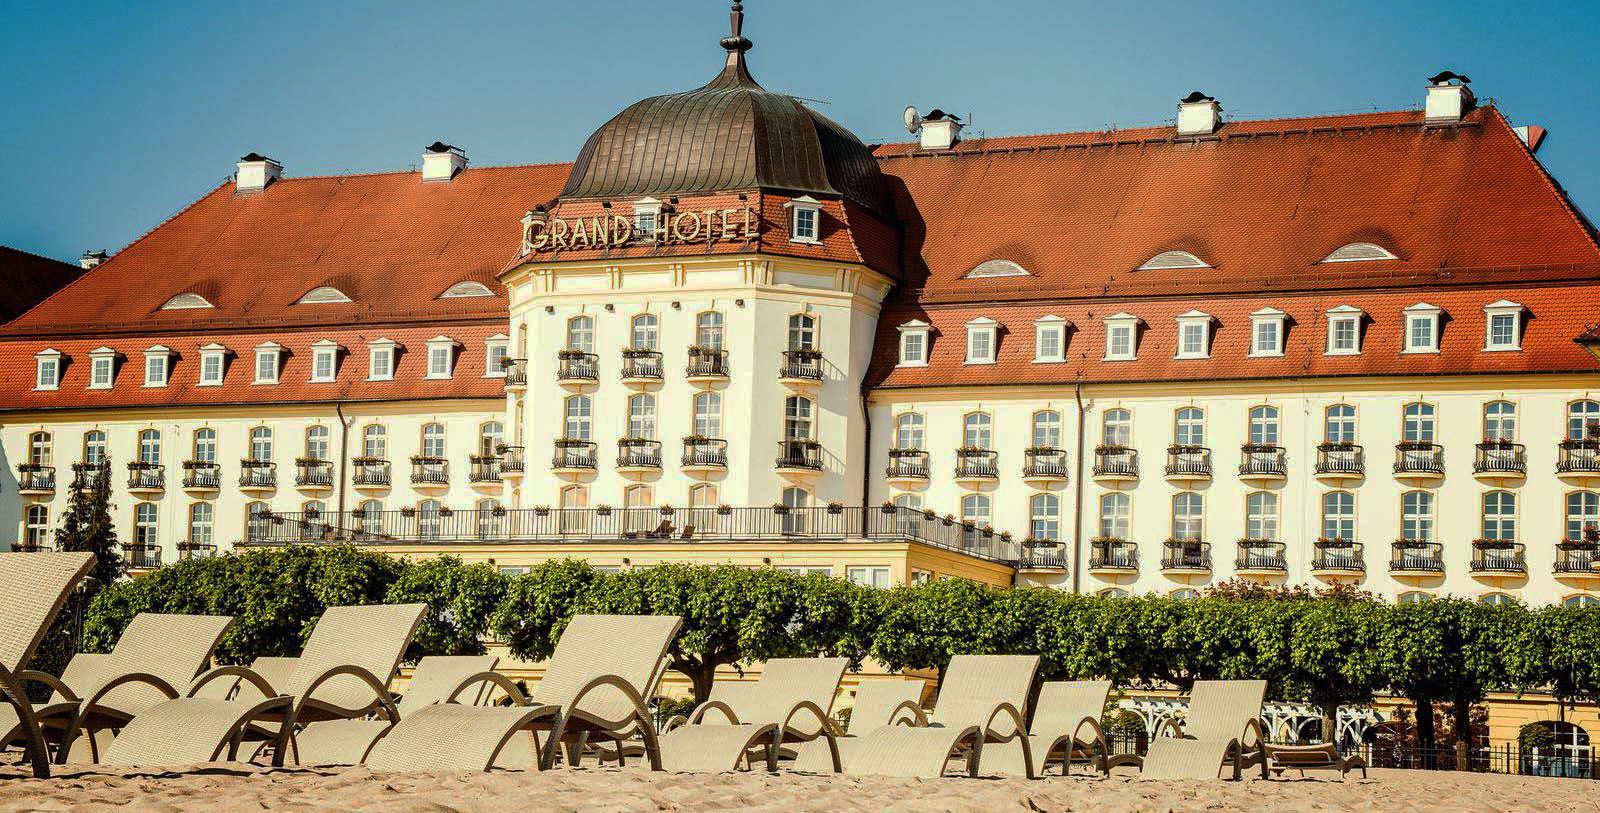 Image of Hotel Façade Sofitel Grand Sopot, 1927, Member of Historic Hotels Worldwide, in Sopot, Poland, Special Offers, Discounted Rates, Families, Romantic Escape, Honeymoons, Anniversaries, Reunions